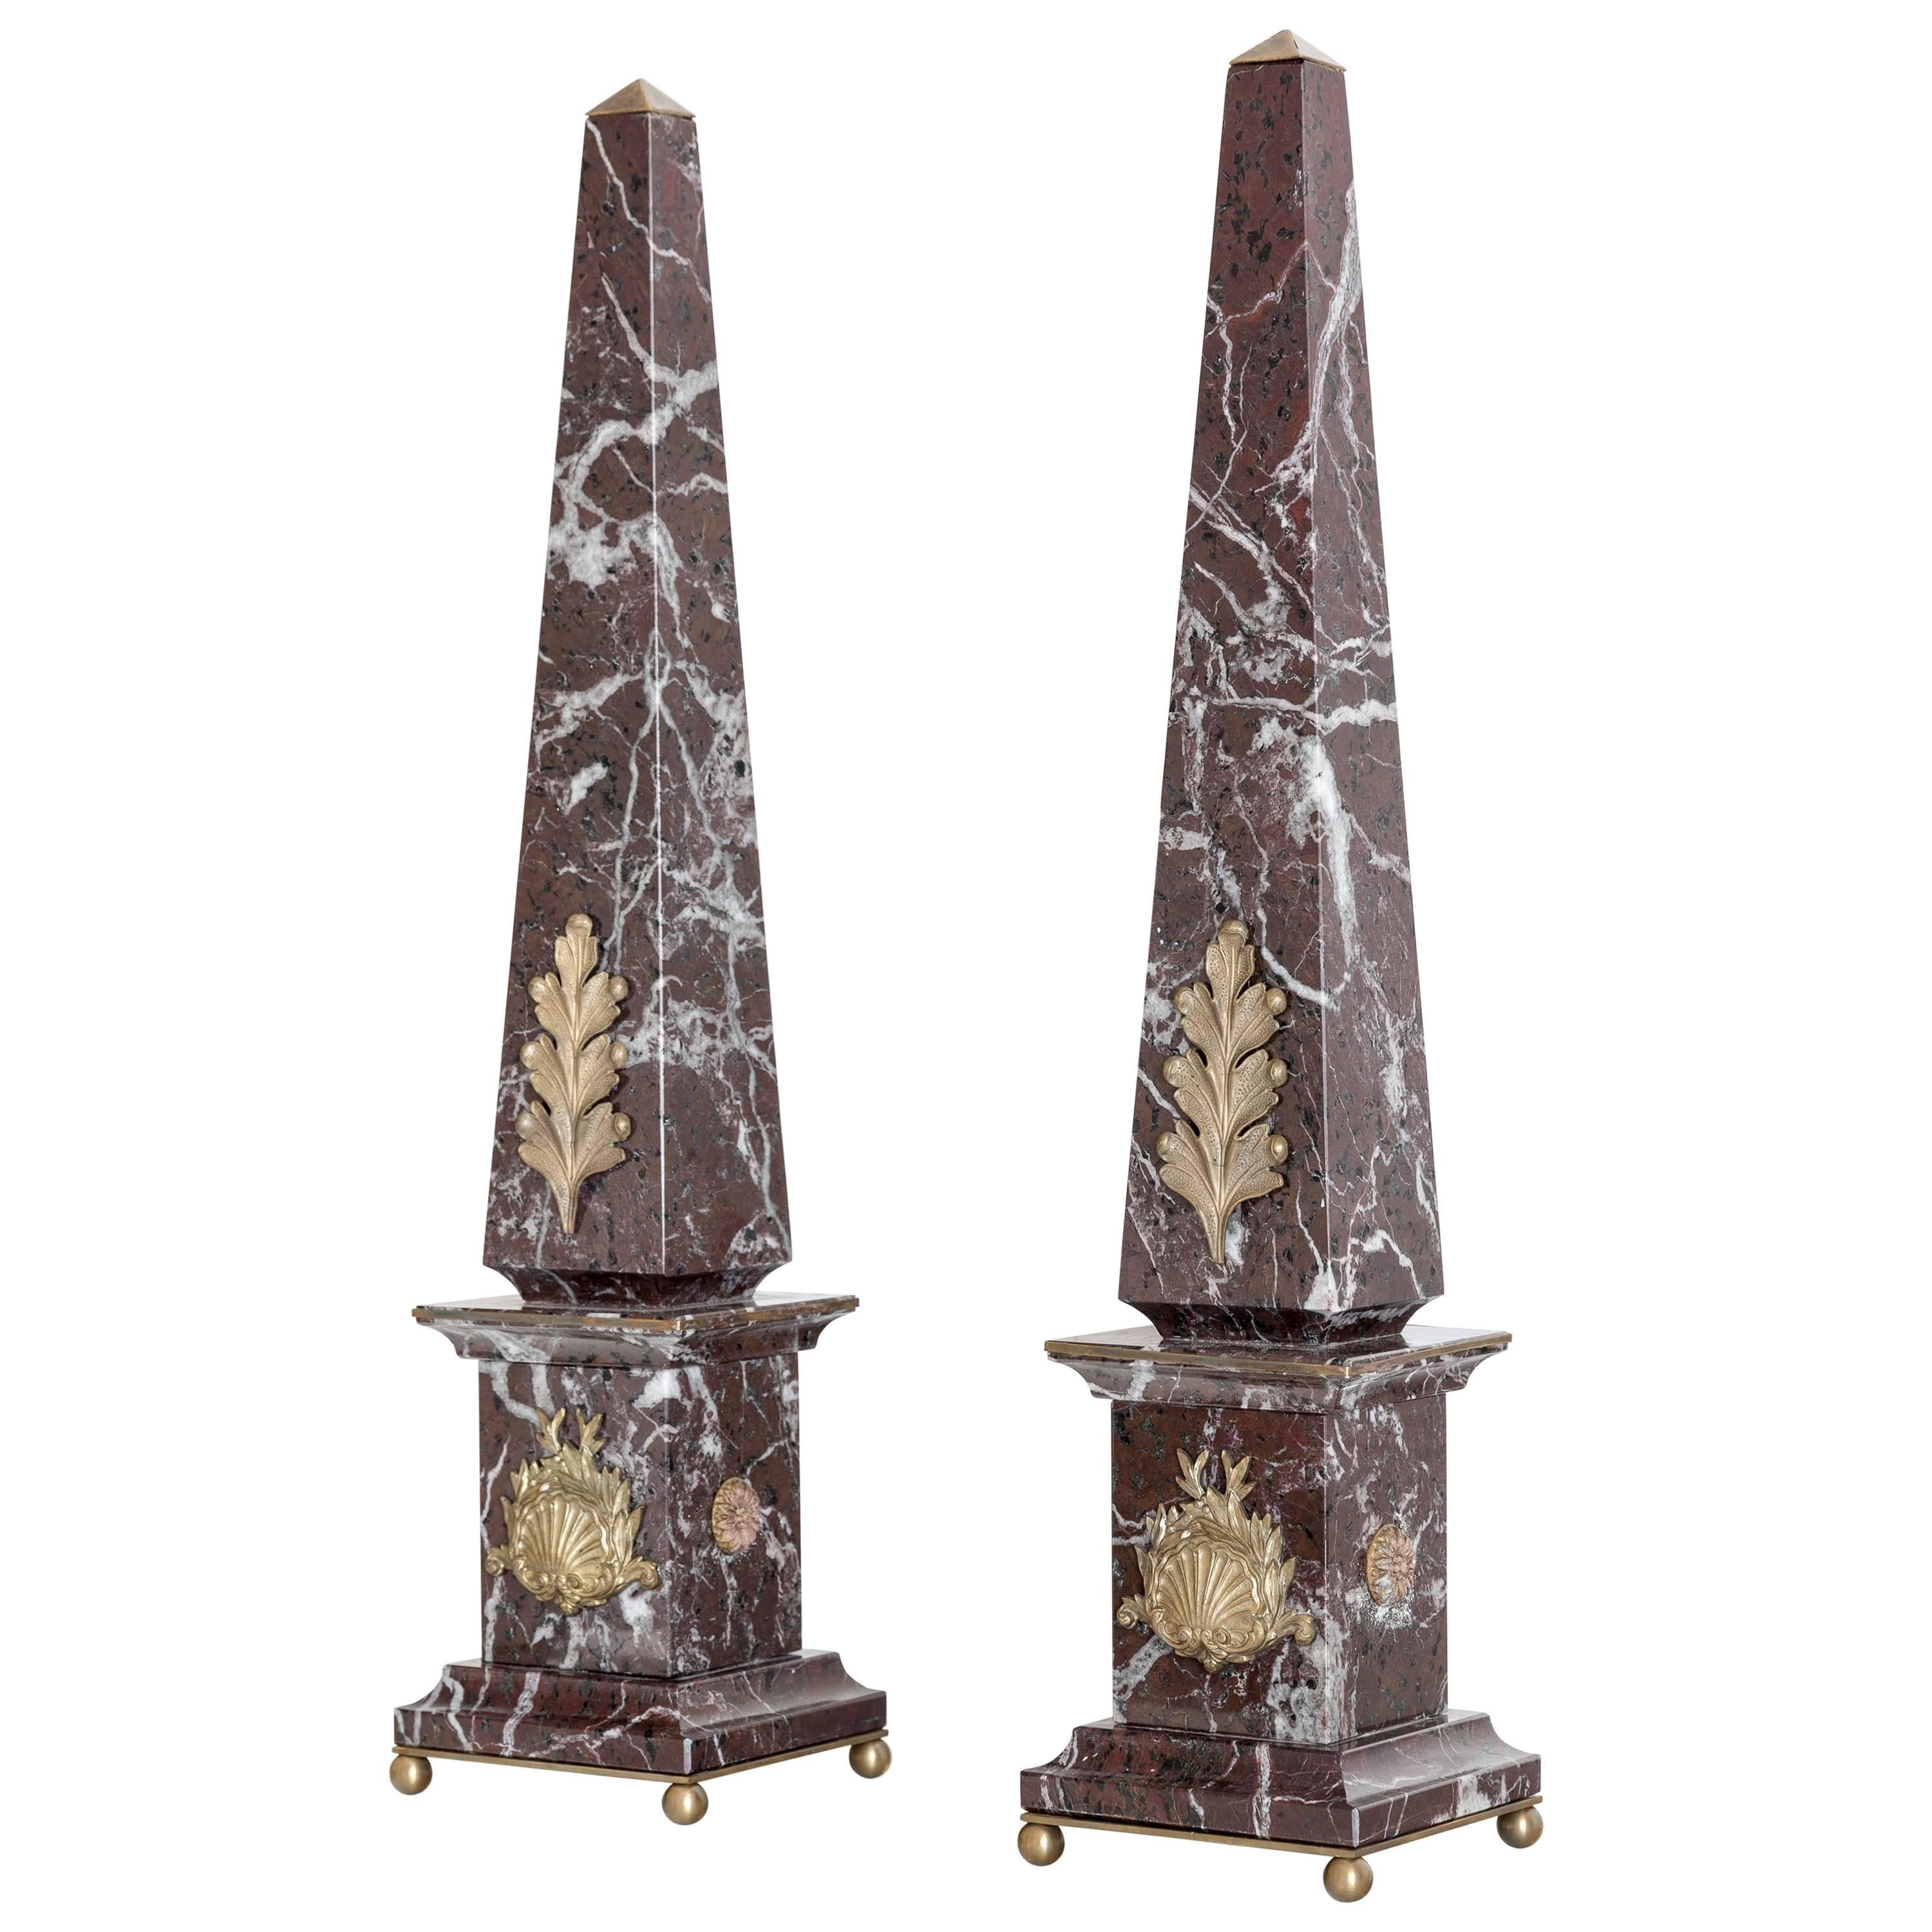 Pair of Italian Red Marble and Bronze Obelisks "Acanthus", Limited Edition, 2017